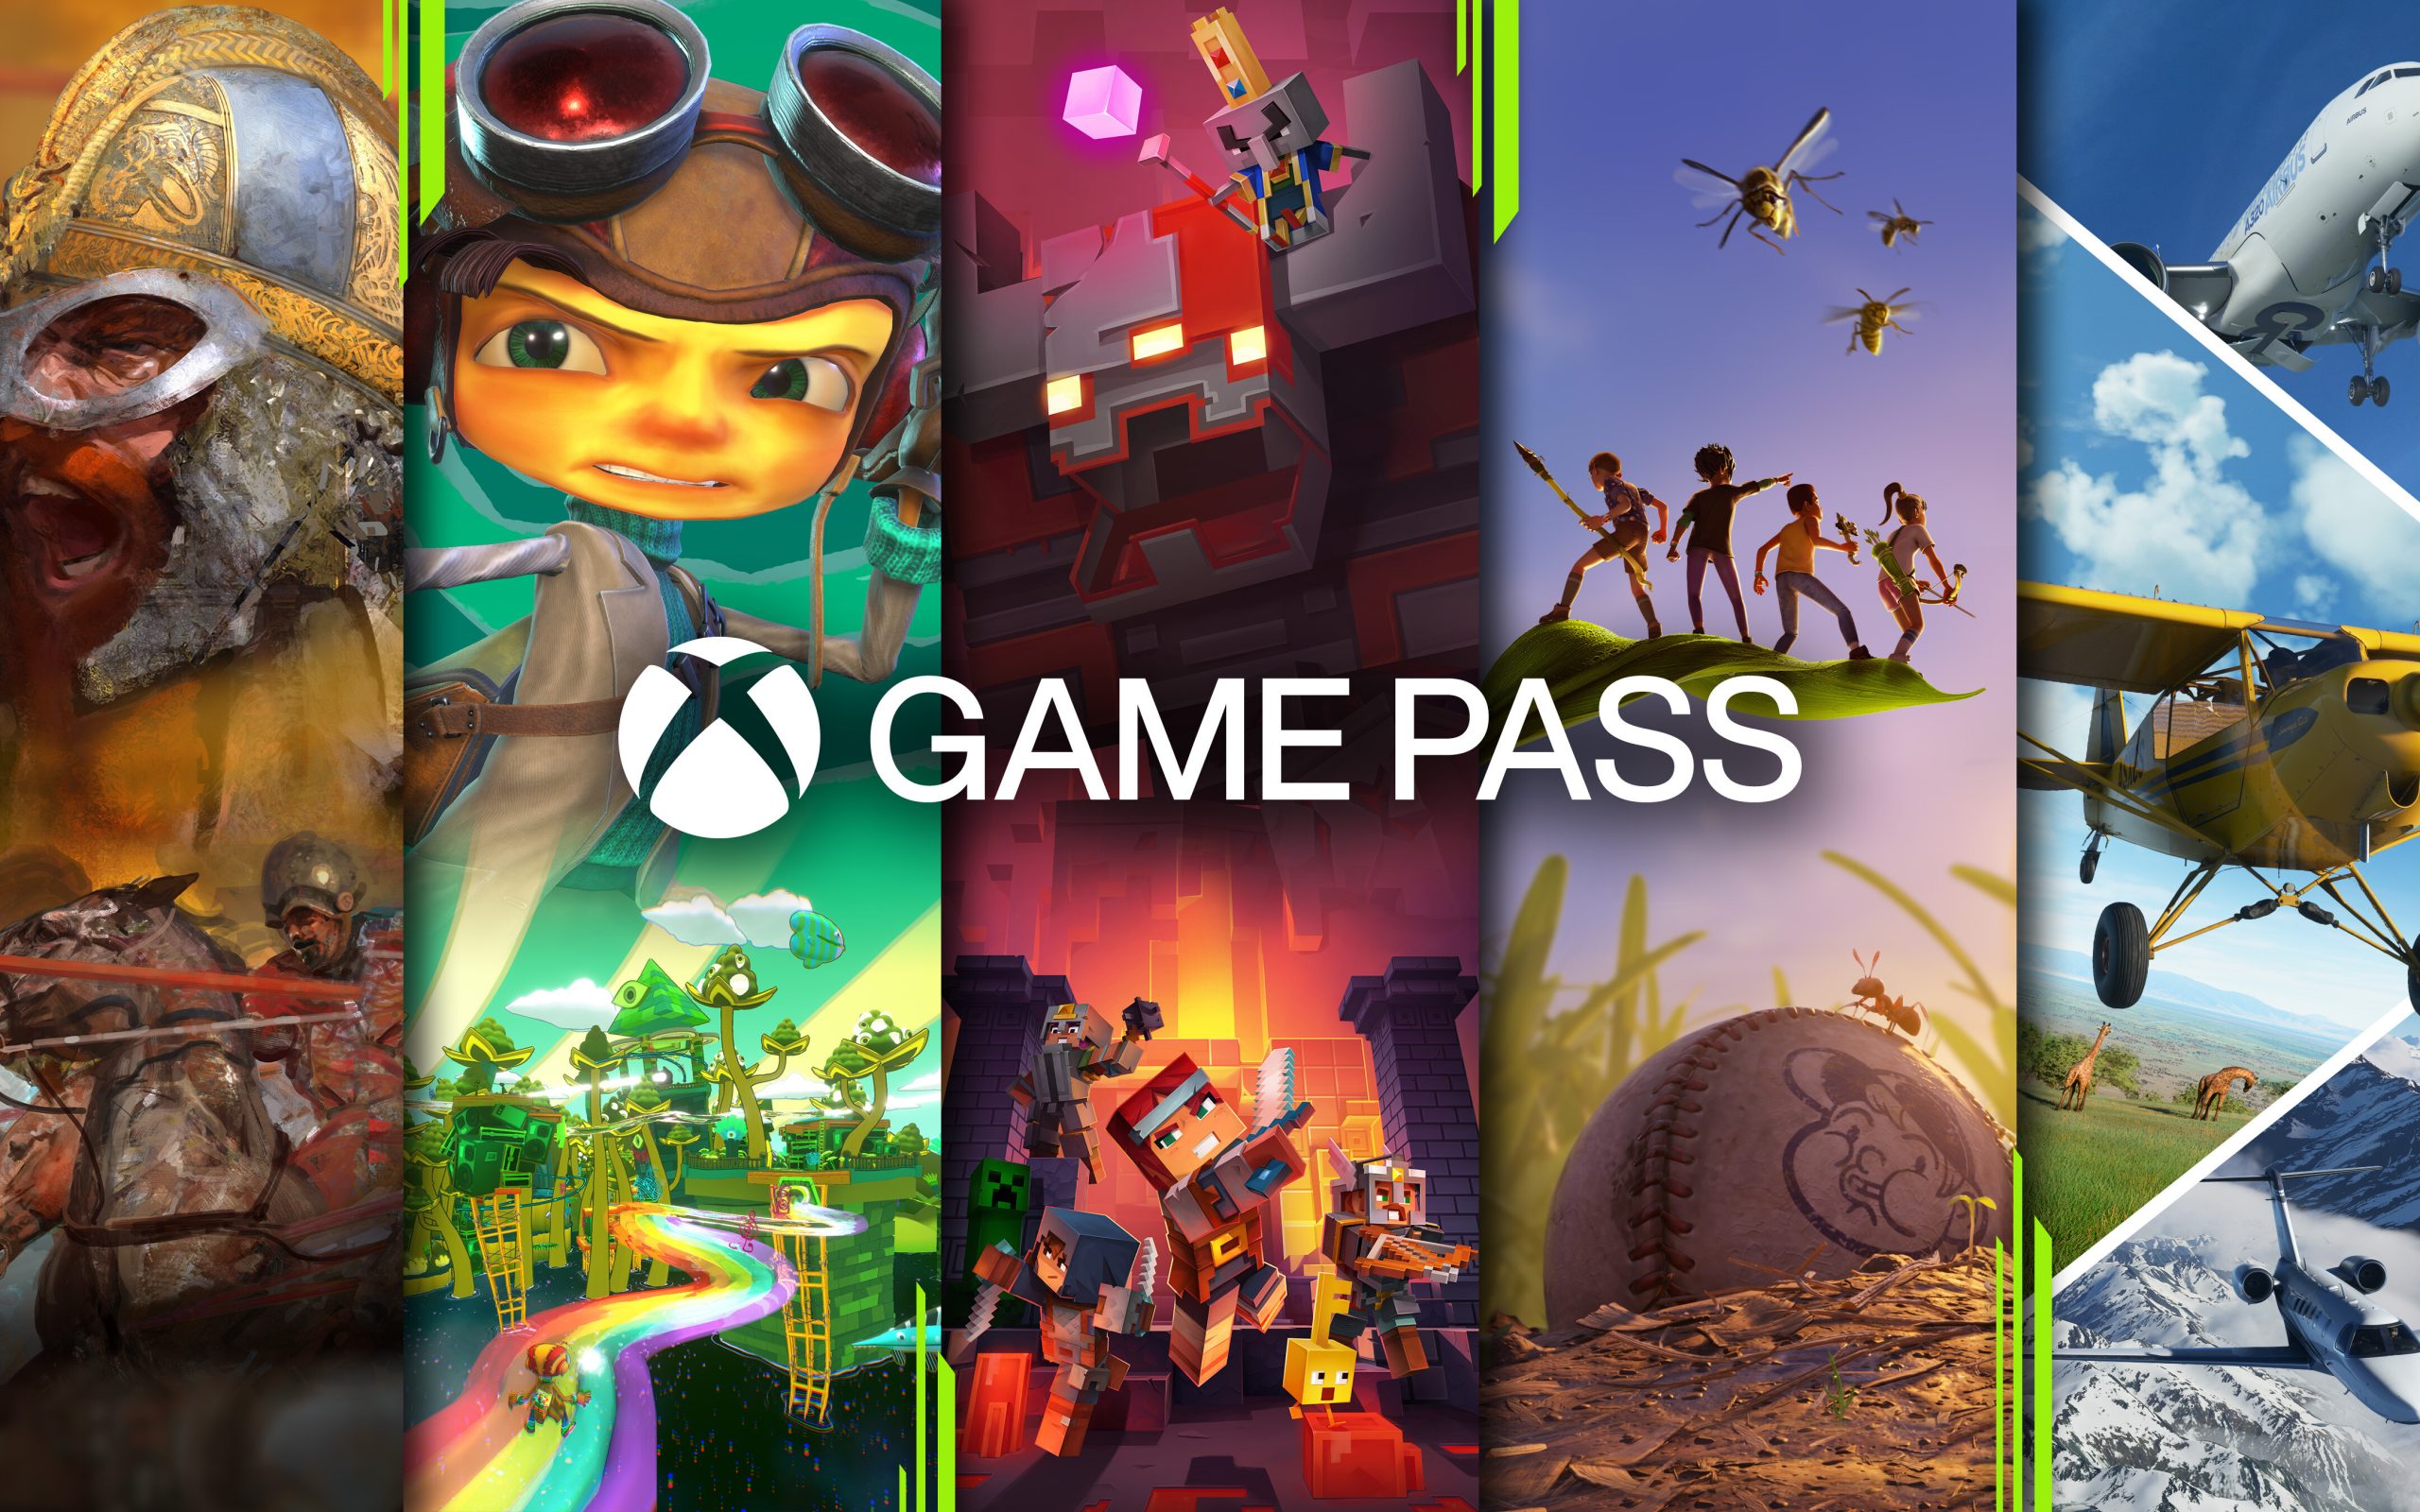 Xbox Game Pass will debut in the second half of 2022. Here are the most important of them